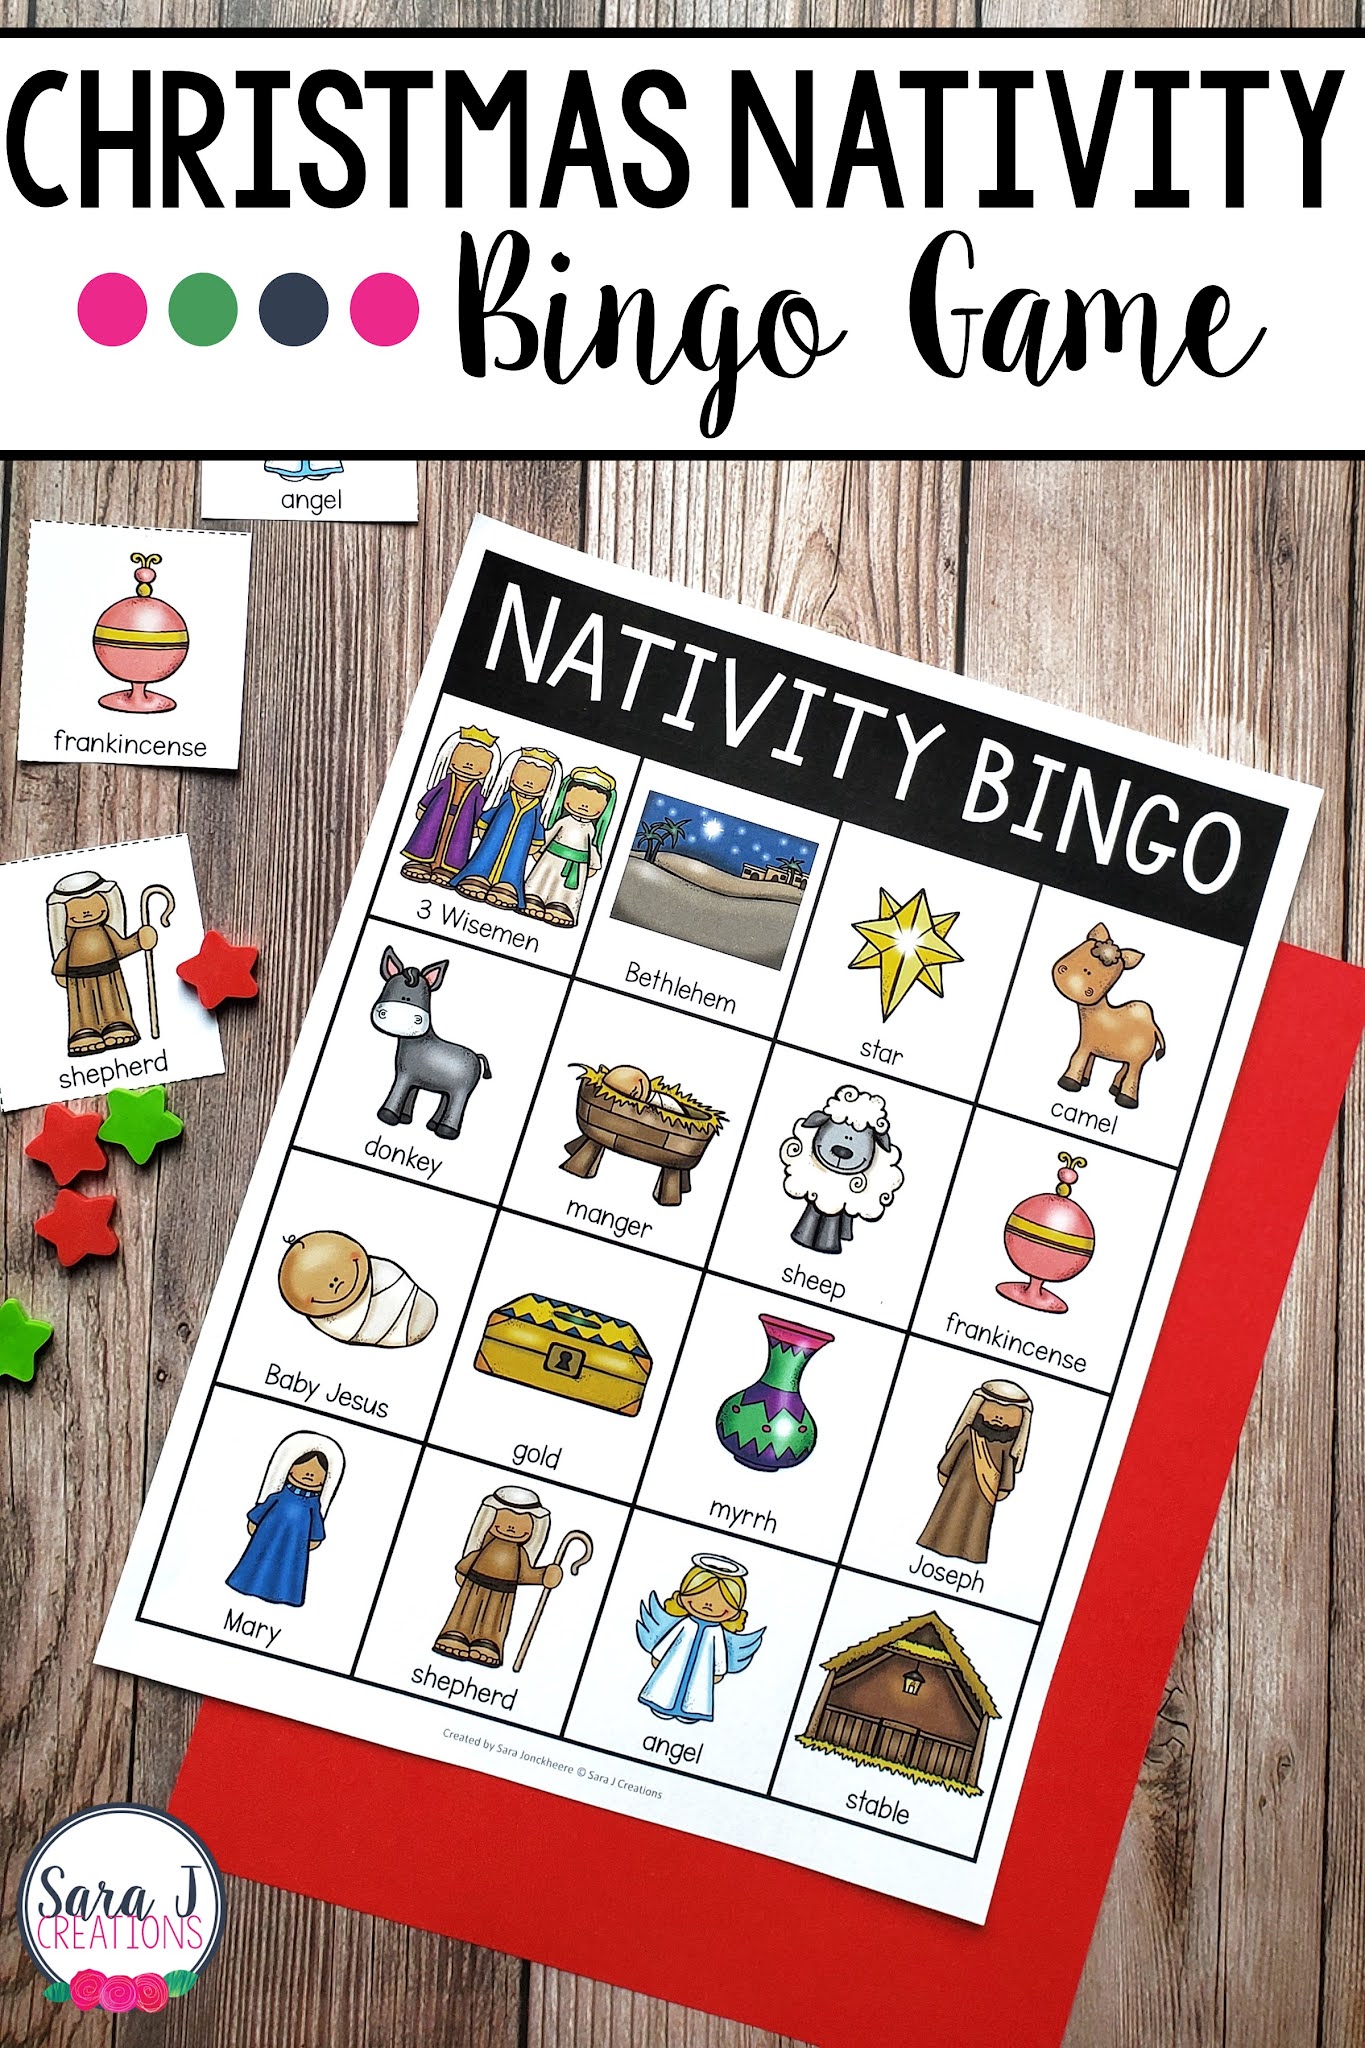 Christmas Nativity Bingo is awesome for kids in a Christian school, Catholic school, Sunday school, church, or homeschool setting. Retell the birth of Jesus with this fun game! Comes in color and black and white plus 30 different boards so you can just print and play and it will be perfect for a large group.